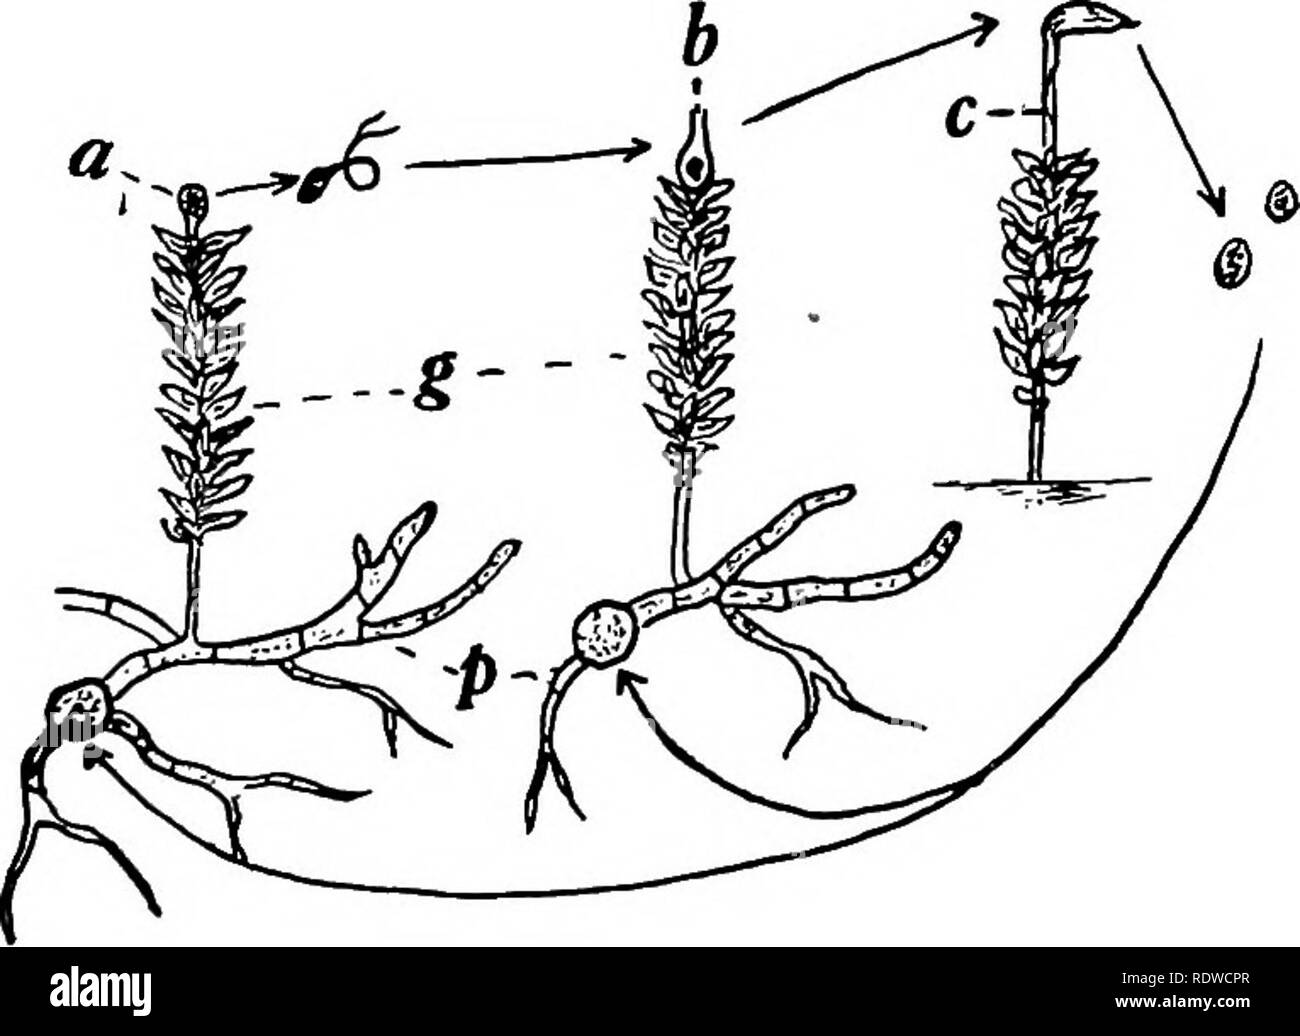 . Botany, with agricultural applications. Botany. TRUE MOSSES (BRYALES) 421 cycle as shown in Figure 376. The Alga-Uke filament called protonema is comparable to the thallus of the Marchantias, and the leafy plants to the gametophores. Although the leafy plants or gametophores of Moss are not all of the gametophyte, they are the conspicuous part of it, the protonemas being microscopic in size. One protonema may produce many buds, and, therefore, many gametophores. In Moss the two generations are more noticeable than in the Liverworts. The gametophytes with their leafy gametophores present more Stock Photo